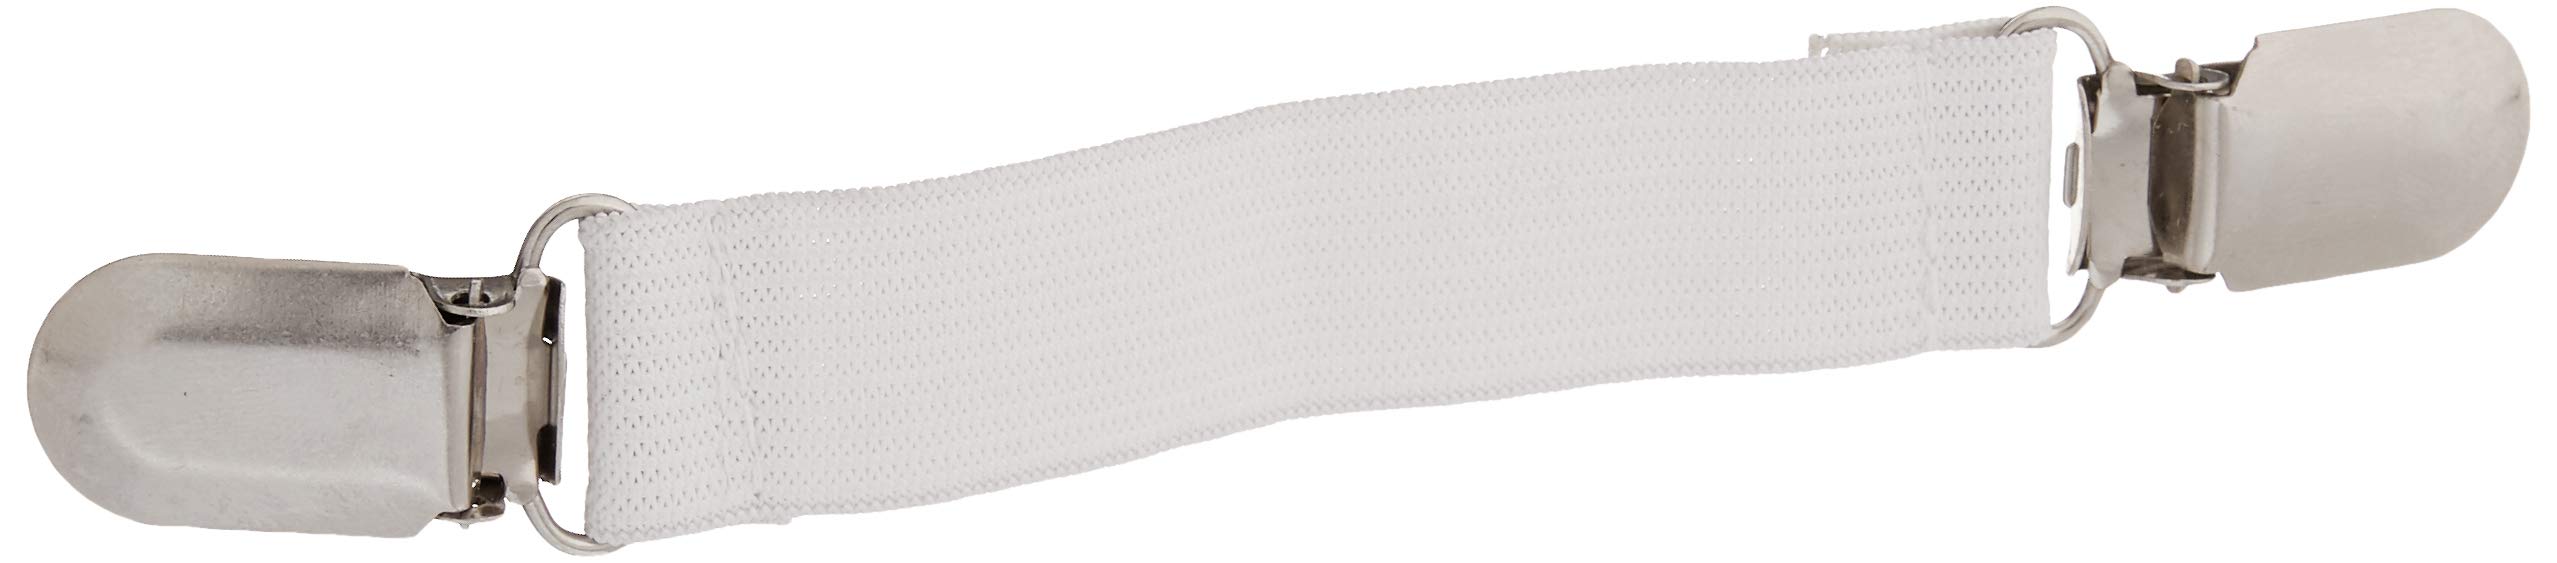 Dritz Clothing Care 82446 Ironing Board Cover Fasteners (4-Count) , White